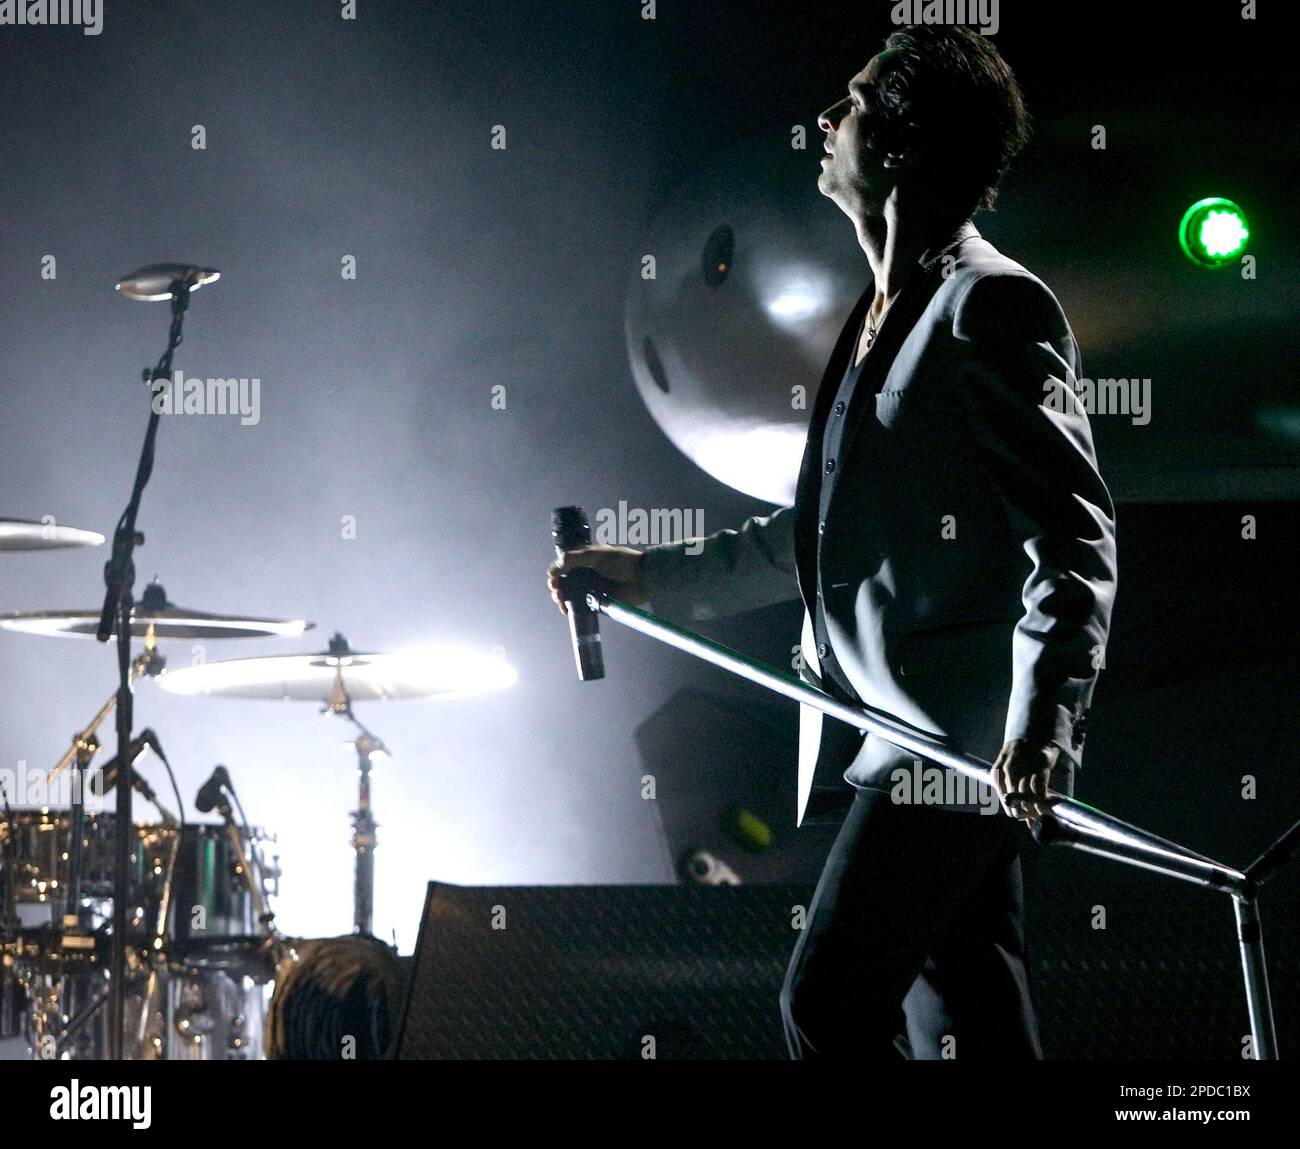 Depeche Mode's Dave Gahan performs on the stage during their "Touring the  Angel" tour in Assago near Milan, Italy, Saturday, Feb. 18, 2006. (AP  Photo/Christopher Olsson Stock Photo - Alamy